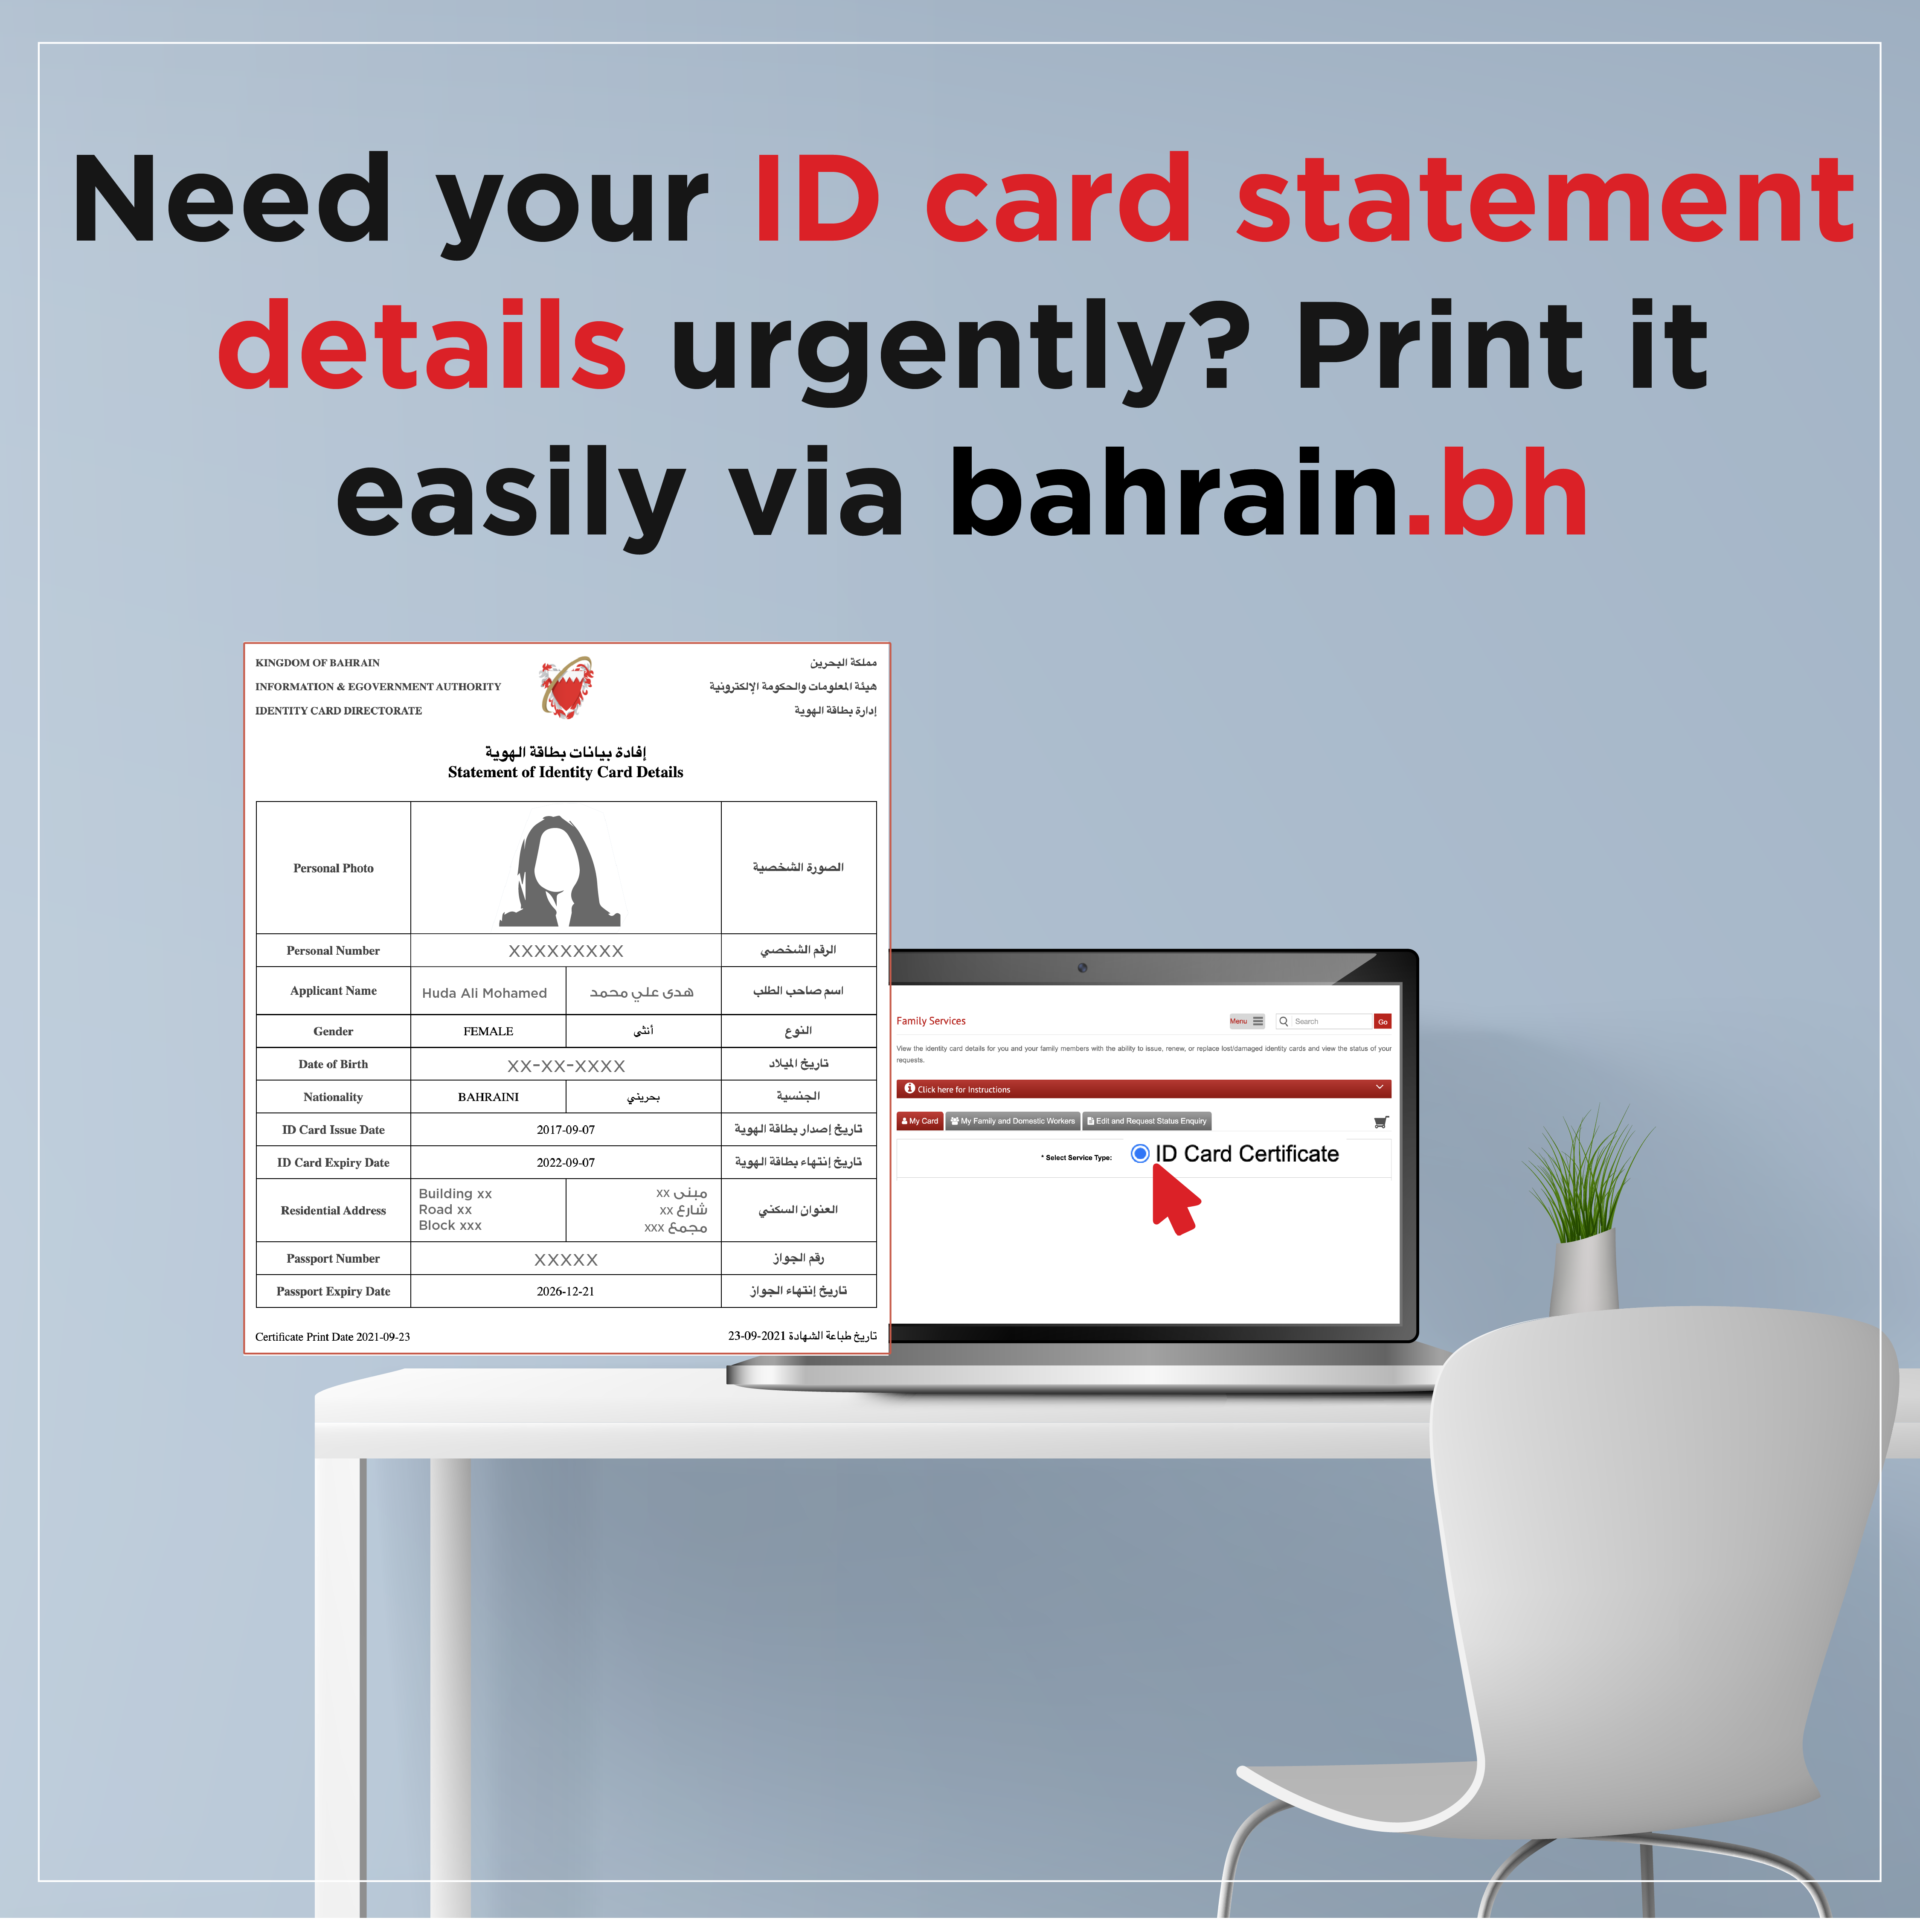 New features add to Identity card services via Bahrain.bh